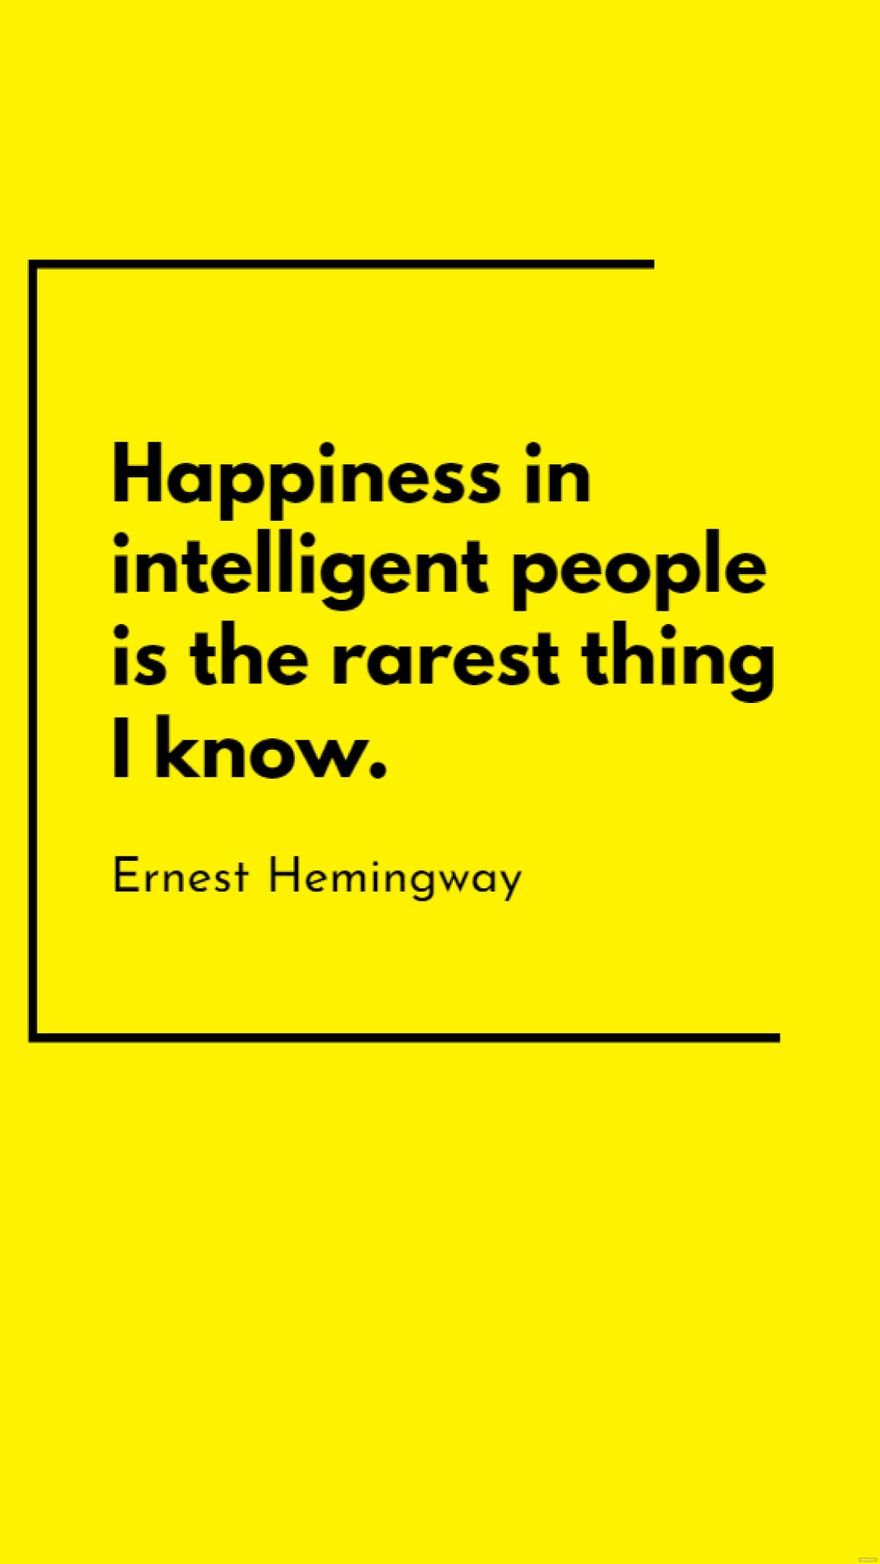 Ernest Hemingway - Happiness in intelligent people is the rarest thing I know.